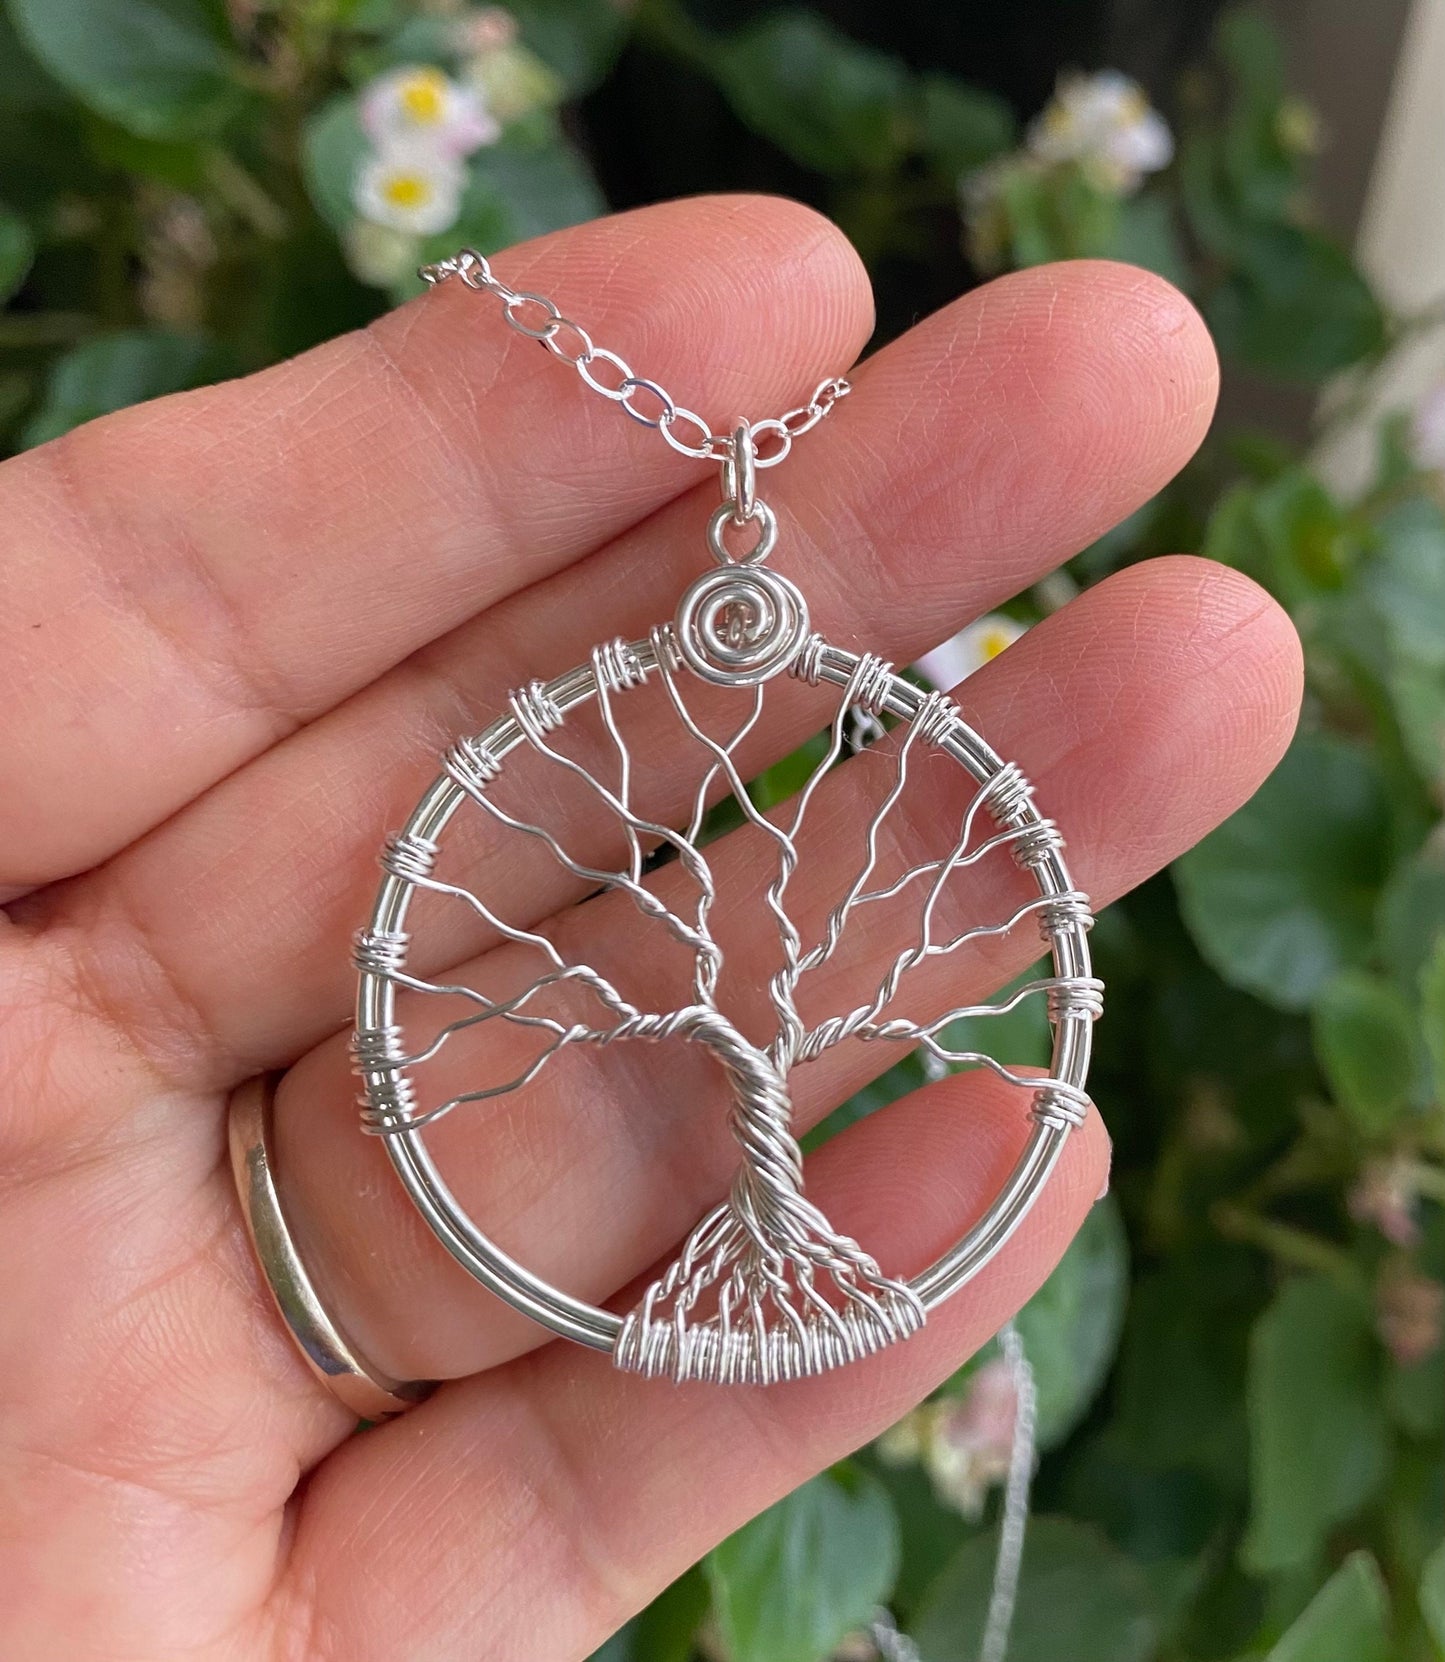 Tree of Life Necklace .925 Sterling Silver,Tree of Life Silver Pendant Necklace,Wire Wrapped Tree of Life Necklace,Tree of Life Jewelry